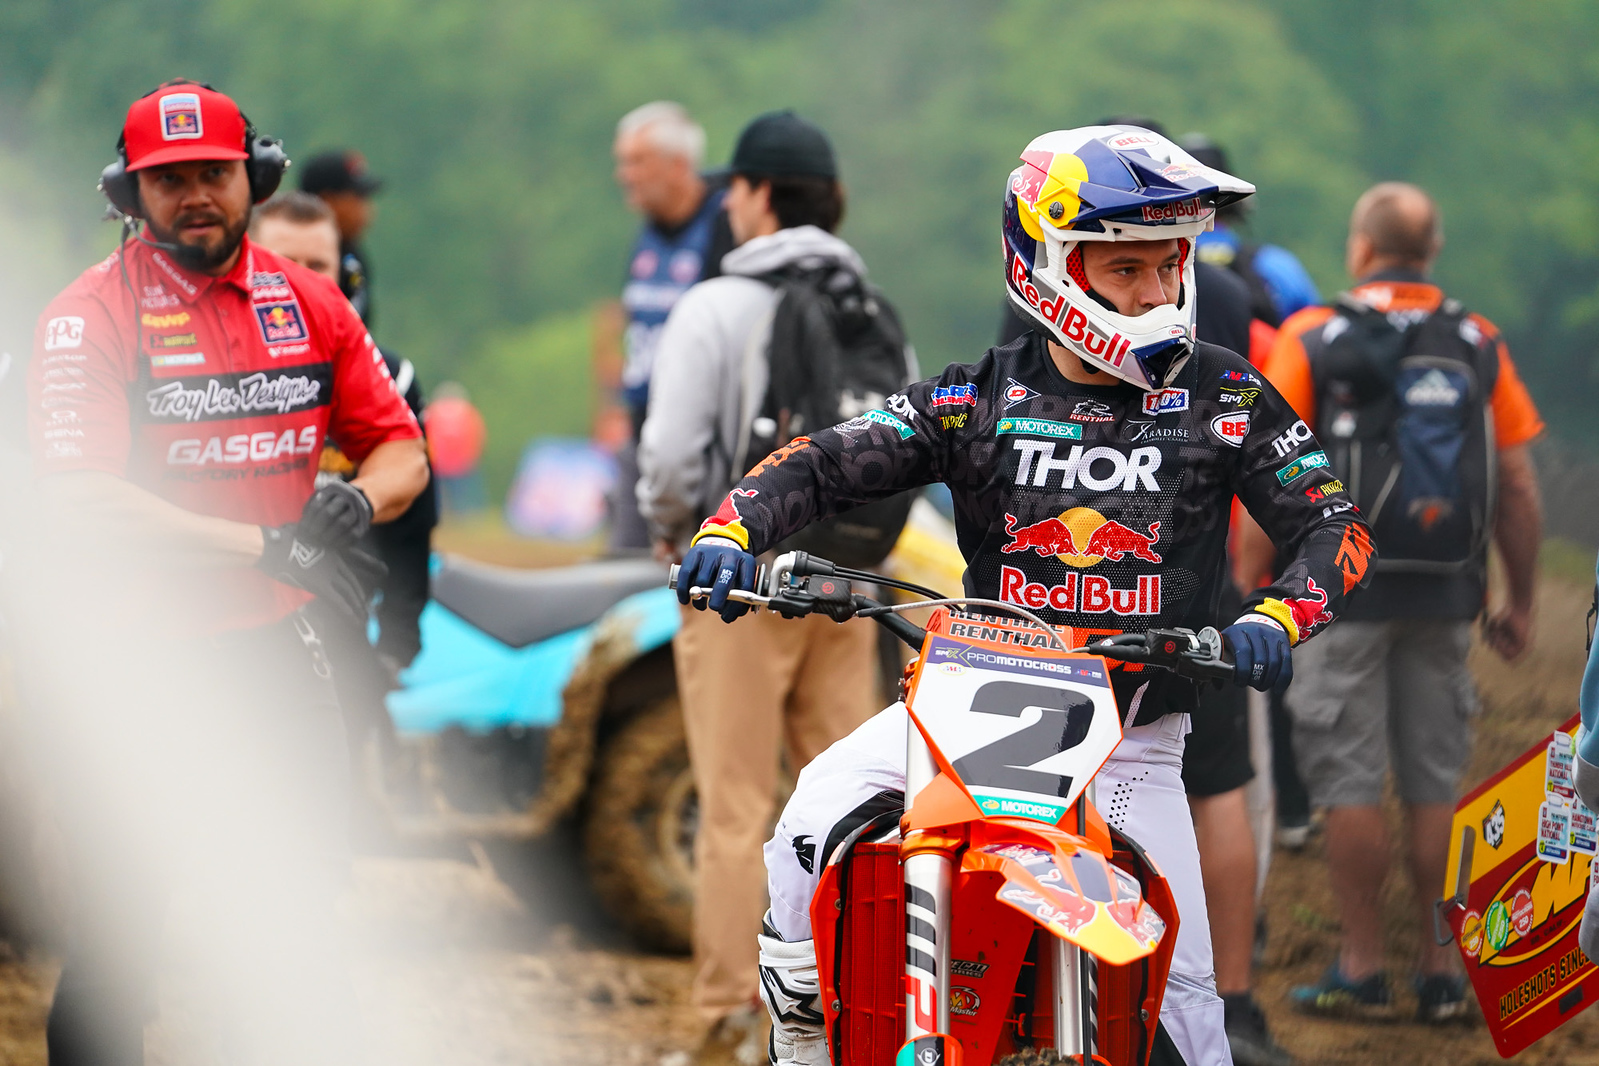 2023 High Point Motocross Qualifying Report & Results Swapmoto Live